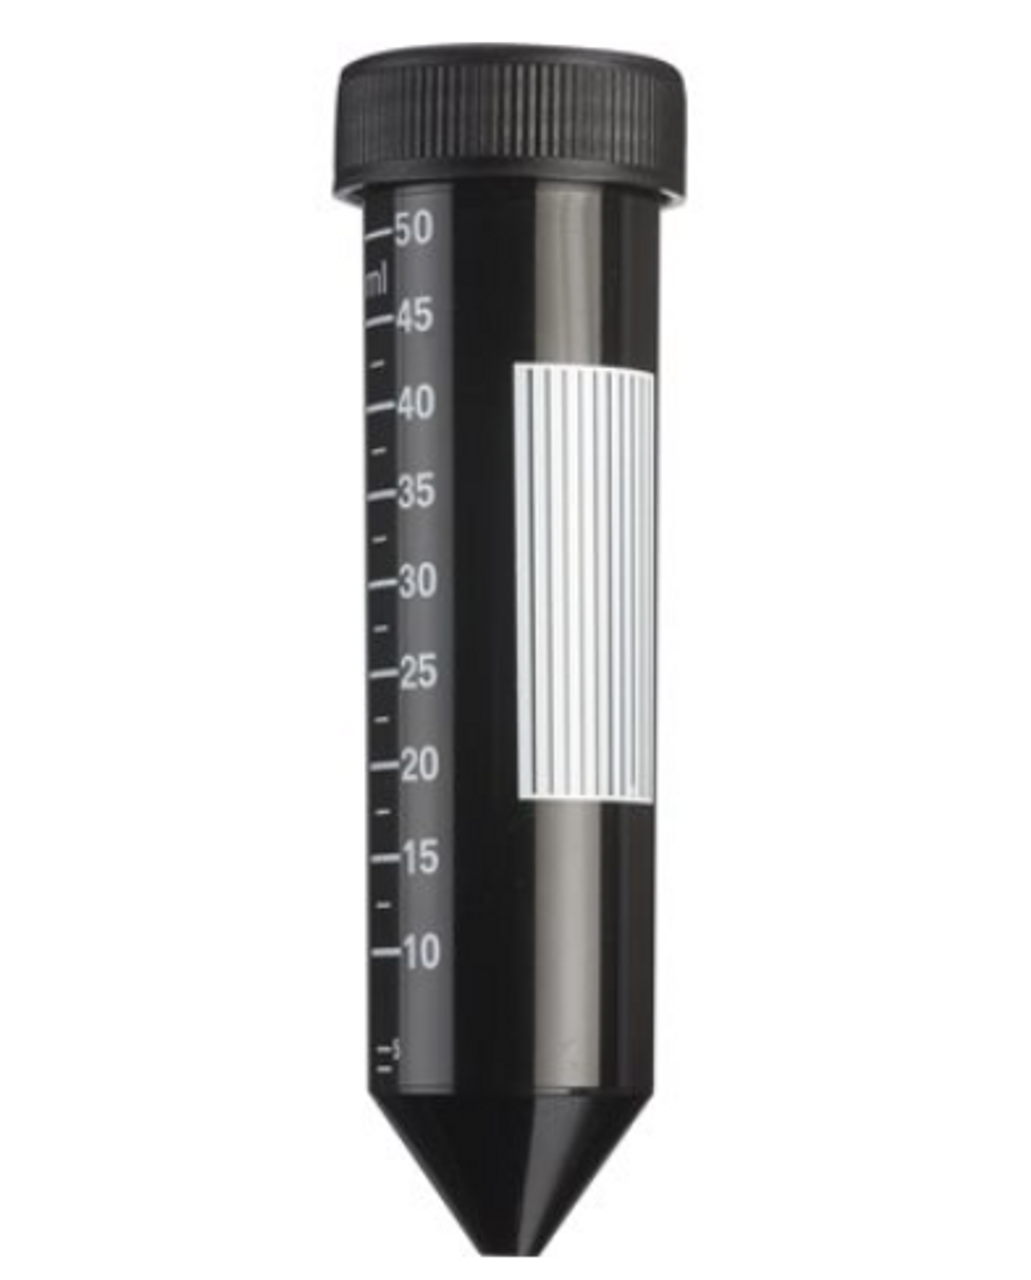 https://cdn11.bigcommerce.com/s-w9bdixgj/images/stencil/1280x1280/products/4312/9516/50mL_Black_Polypropylene_Conical_Centrifuge_Tubes_For_Light_Sensitive_Samples_-_Lab_Supplies_-_Stellar_Scientific__84553.1631201168.png?c=2